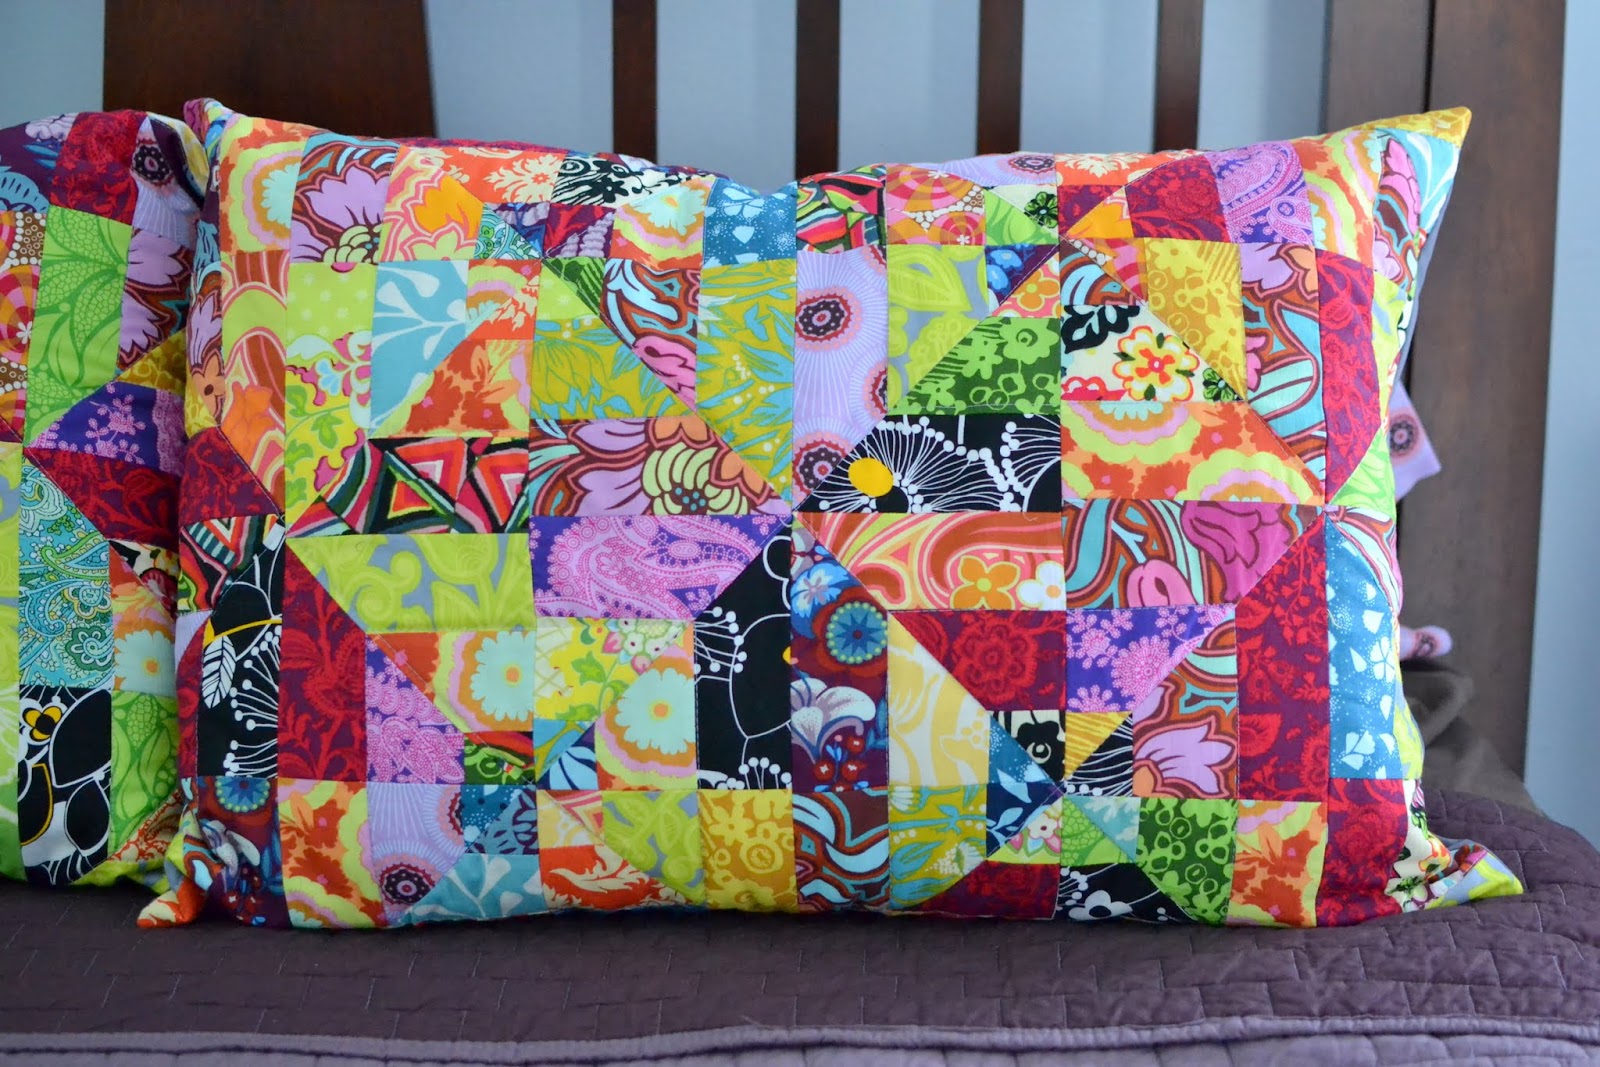 Scrappy Quilted Patchwork Pillows